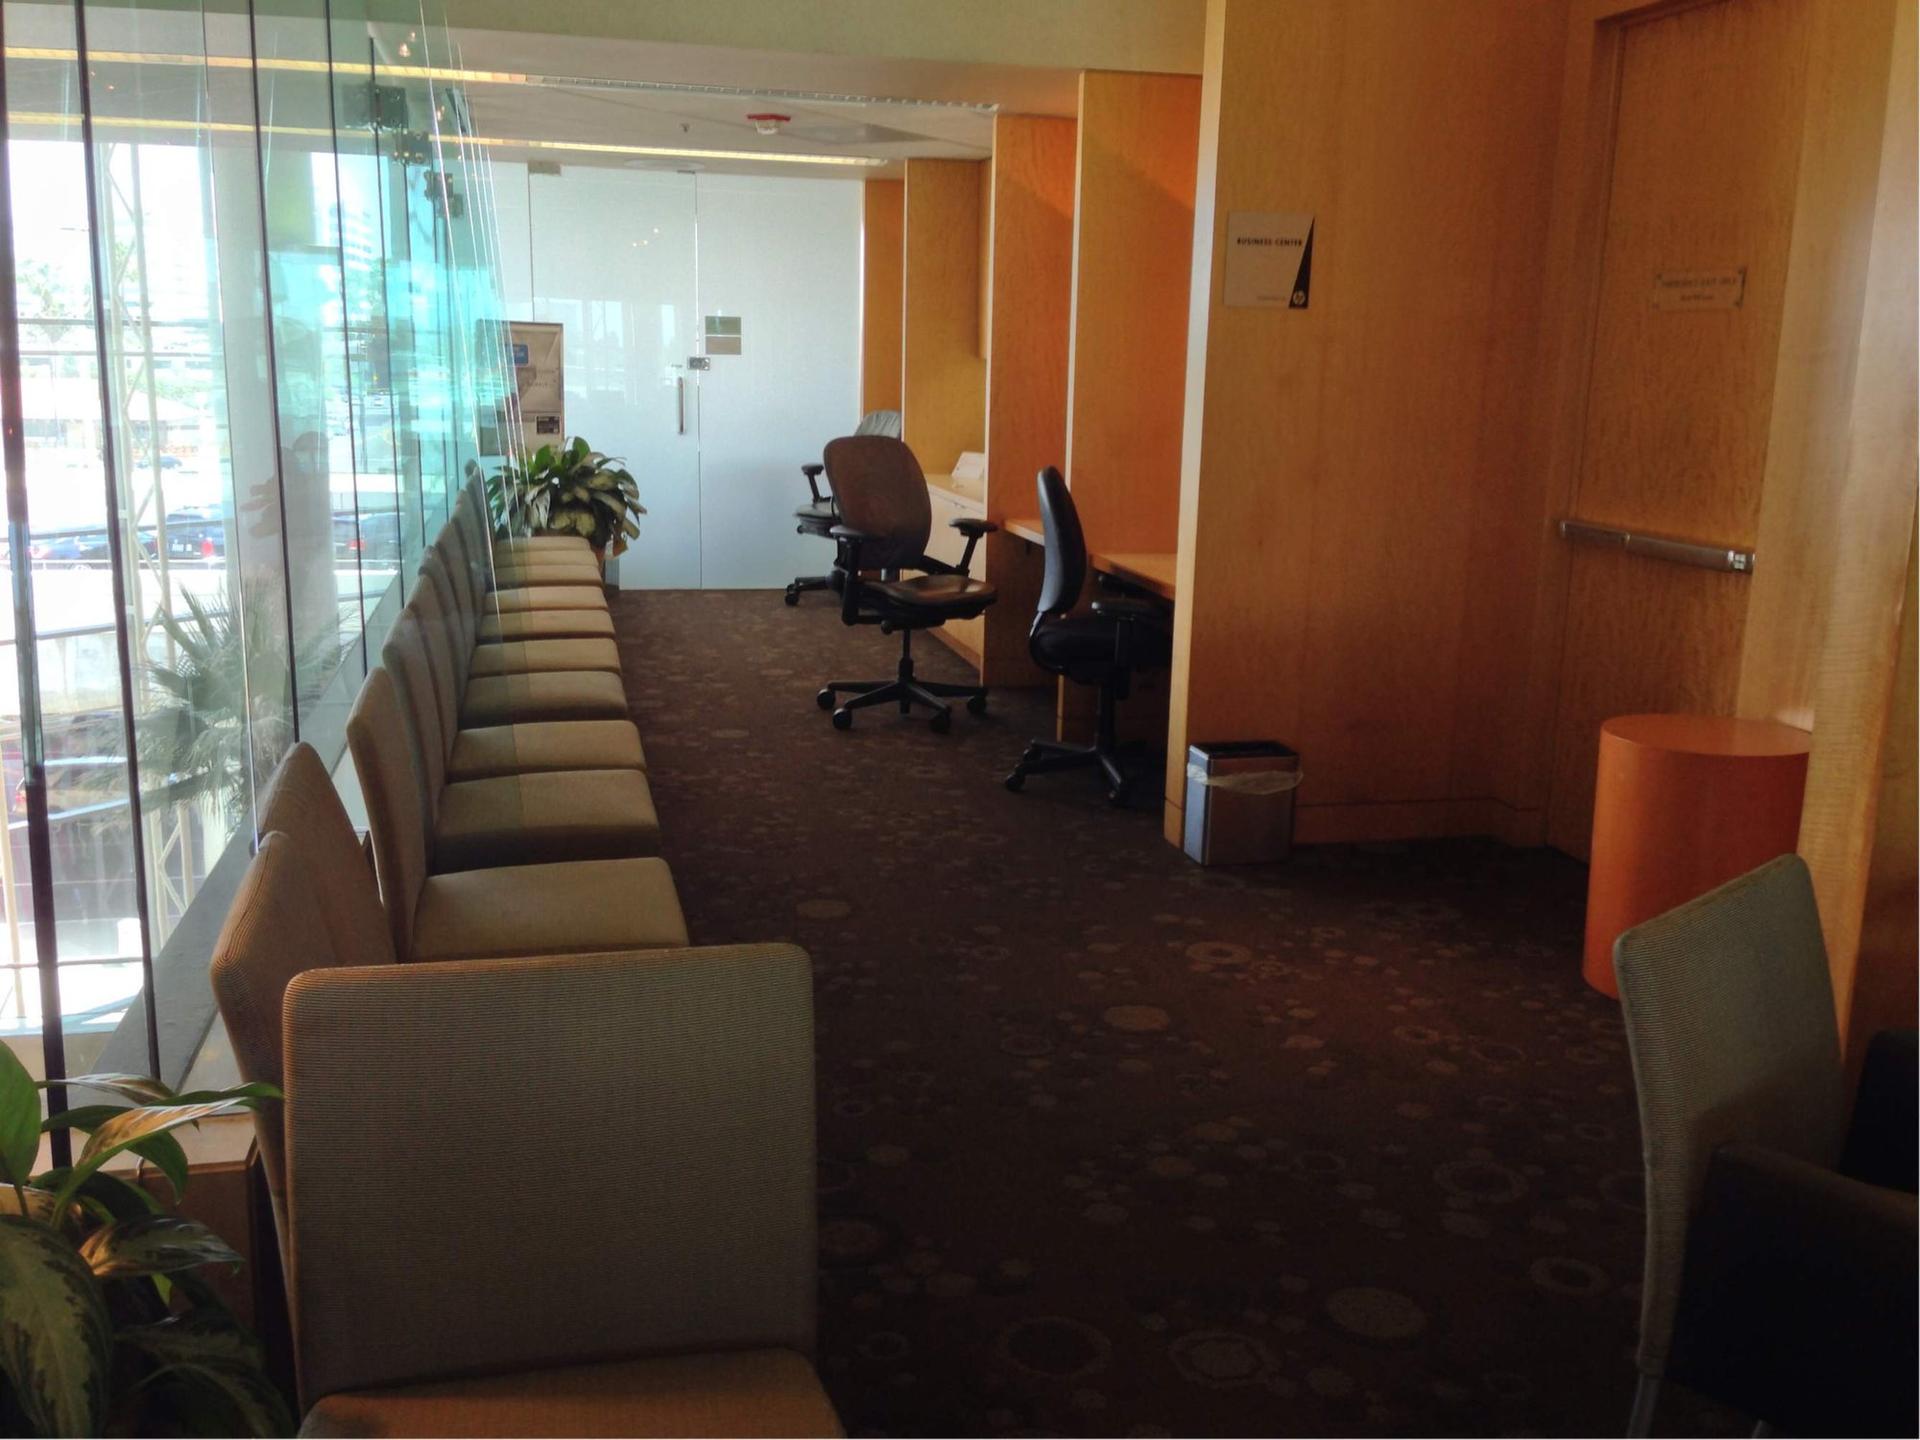 American Airlines Admirals Club image 3 of 12